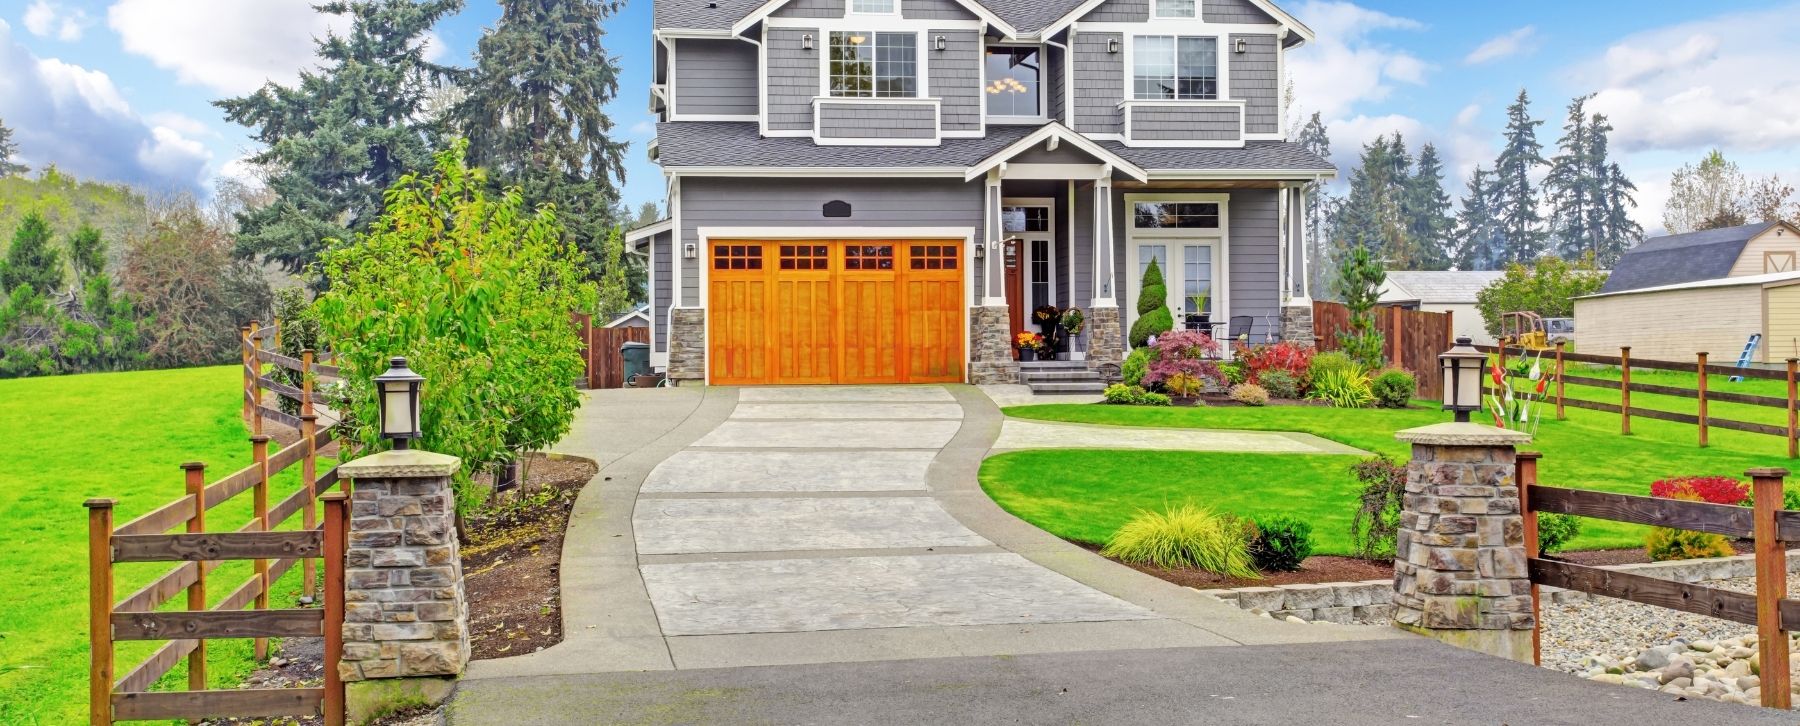 Why You Should Upgrade Your Driveway with RealSteel Home Numbers